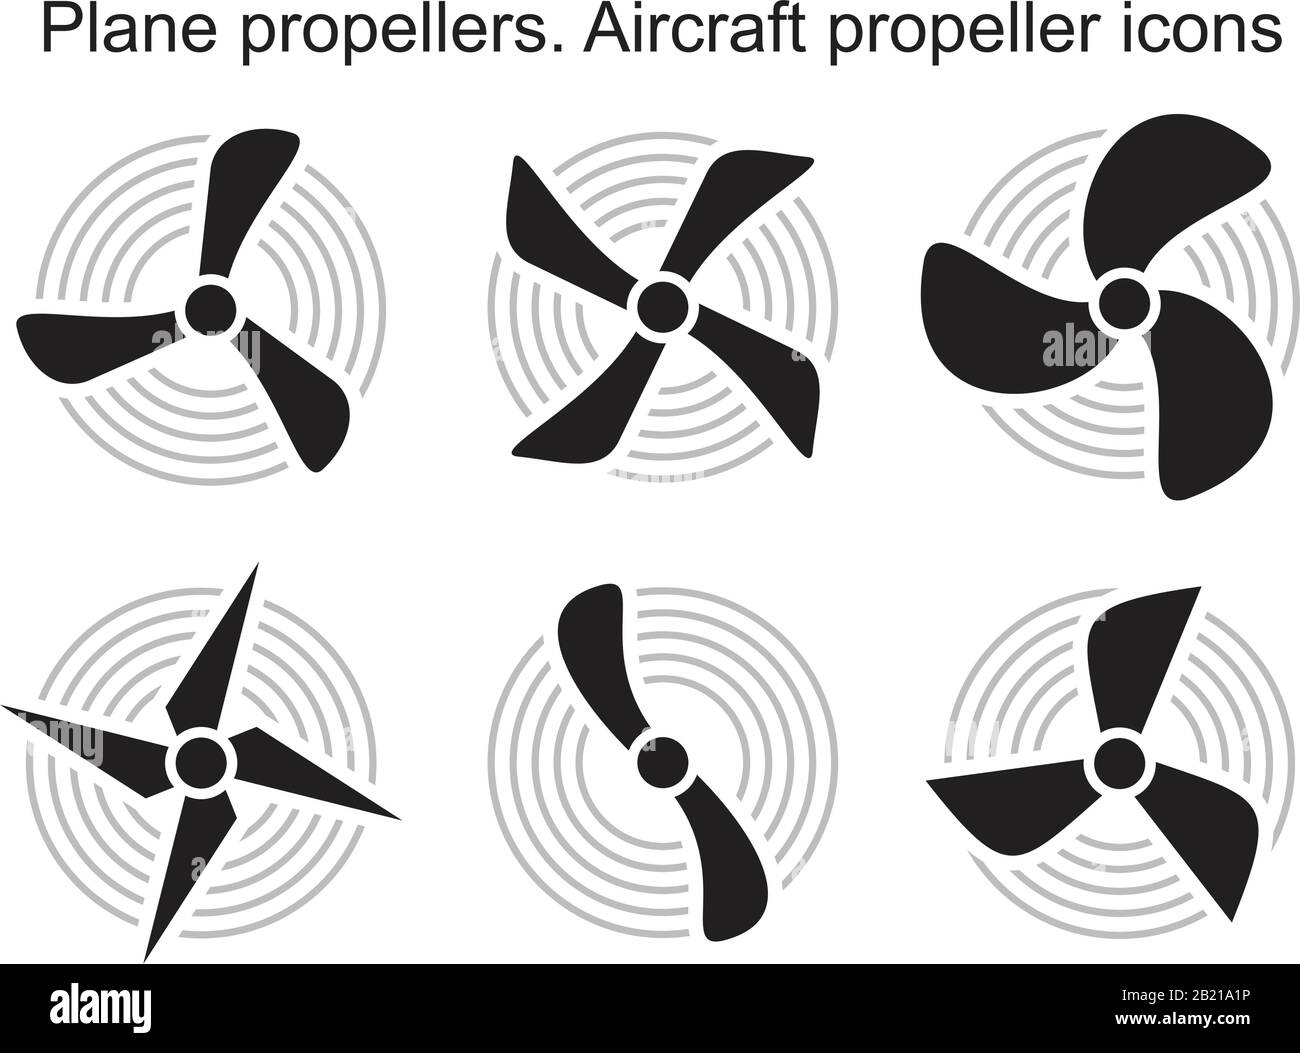 Plane propellers, Aircraft propeller Icon template black color editable. Plane propellers, Aircraft propeller Icon symbol Flat vector illustration for Stock Vector